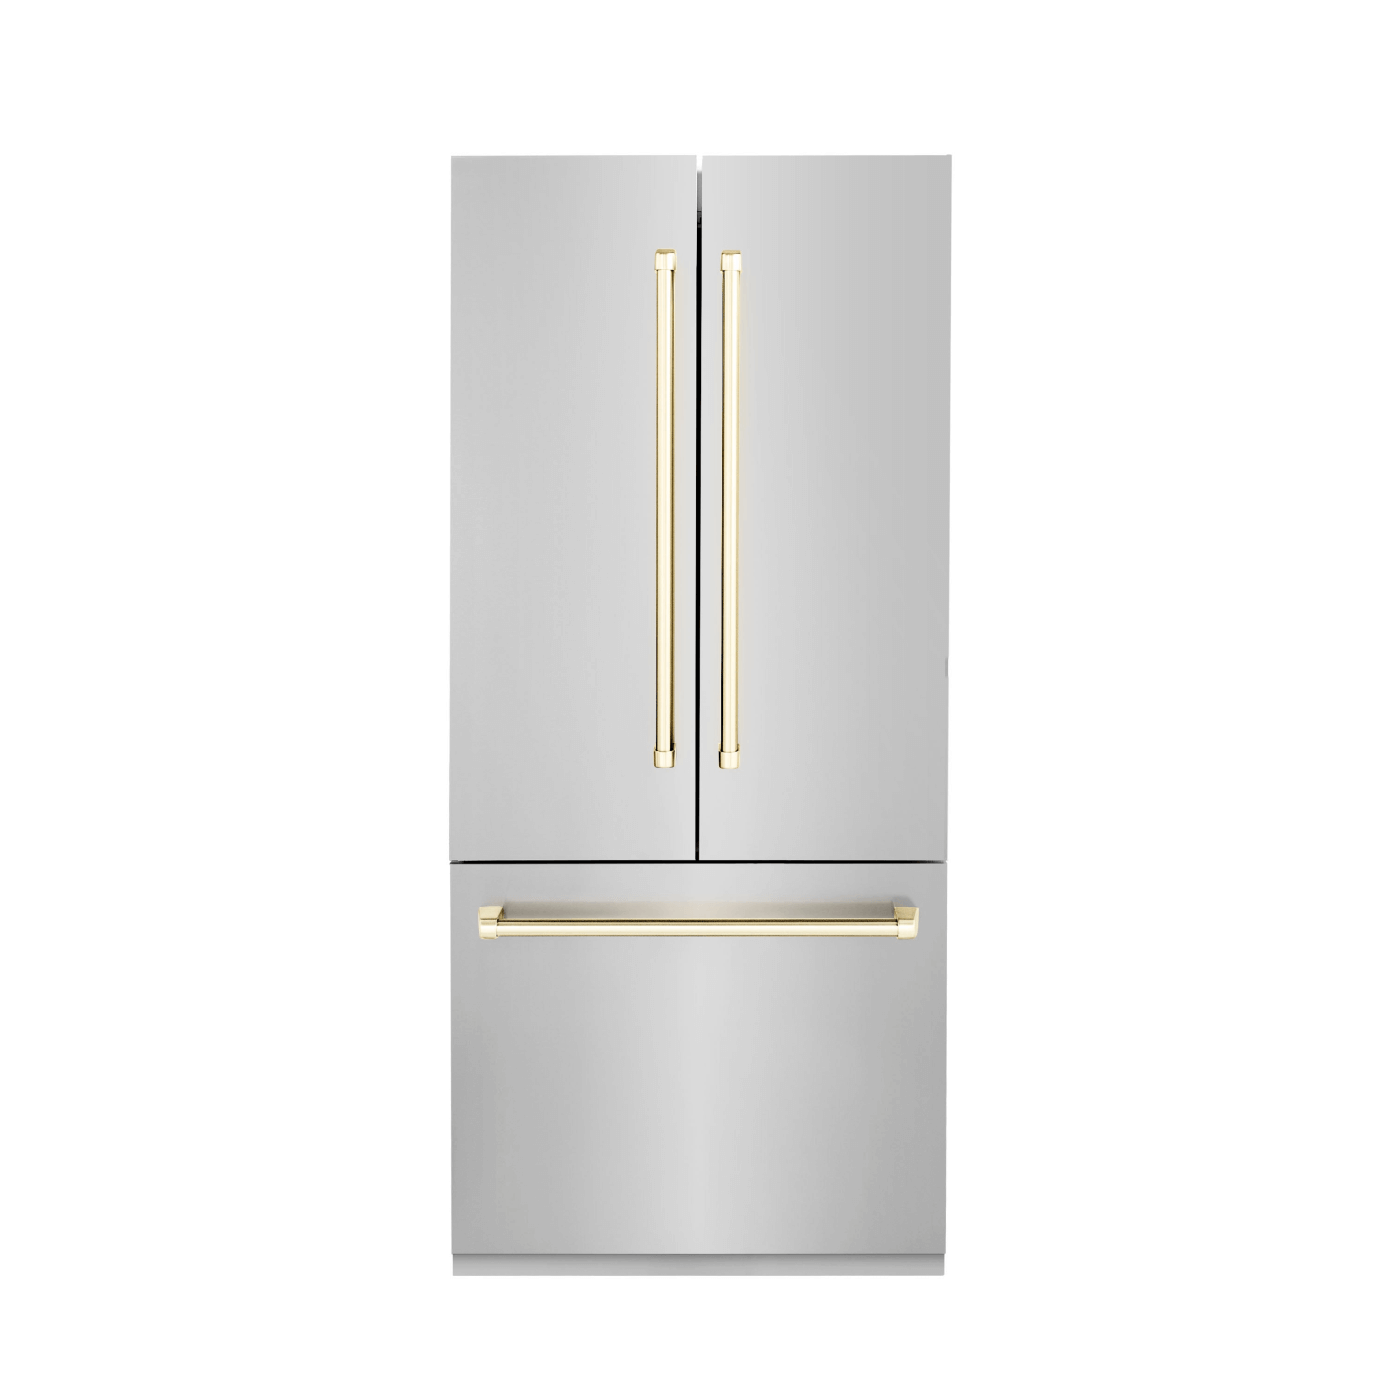 ZLINE 36” Autograph Edition 19.6 cu. ft. Built-in 2-Door Bottom Freezer Refrigerator with Internal Water and Ice Dispenser in Stainless Steel with Polished Gold Accents (RBIVZ-304-36-G) - white background